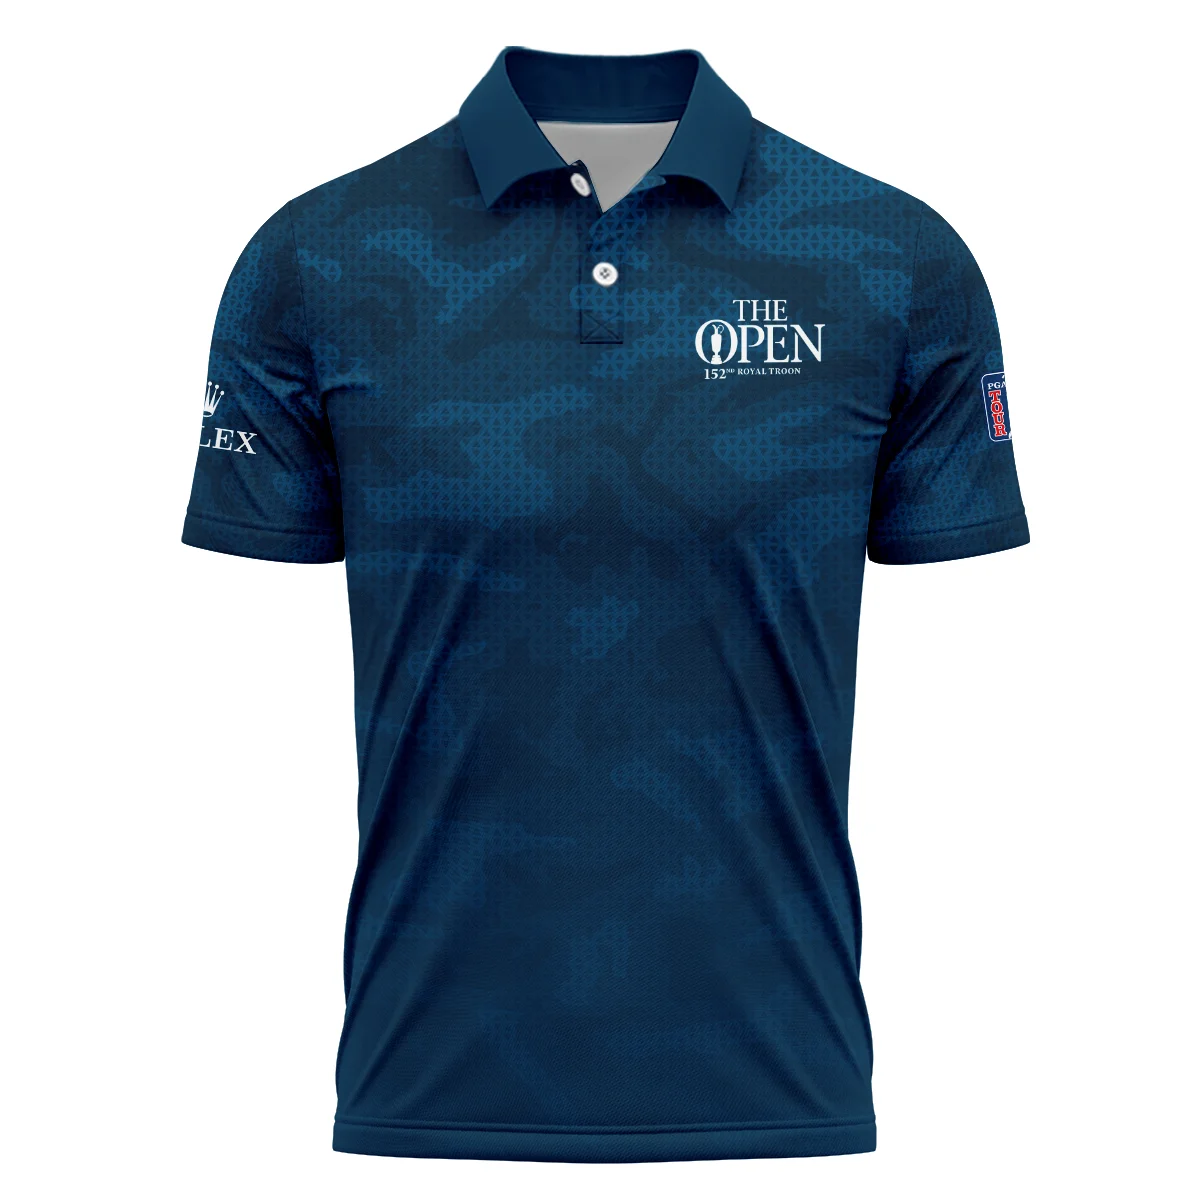 Rolex 152nd Open Championship Dark Blue Abstract Background Vneck Polo Shirt All Over Prints  HOTOP260624A02ROXZVPL